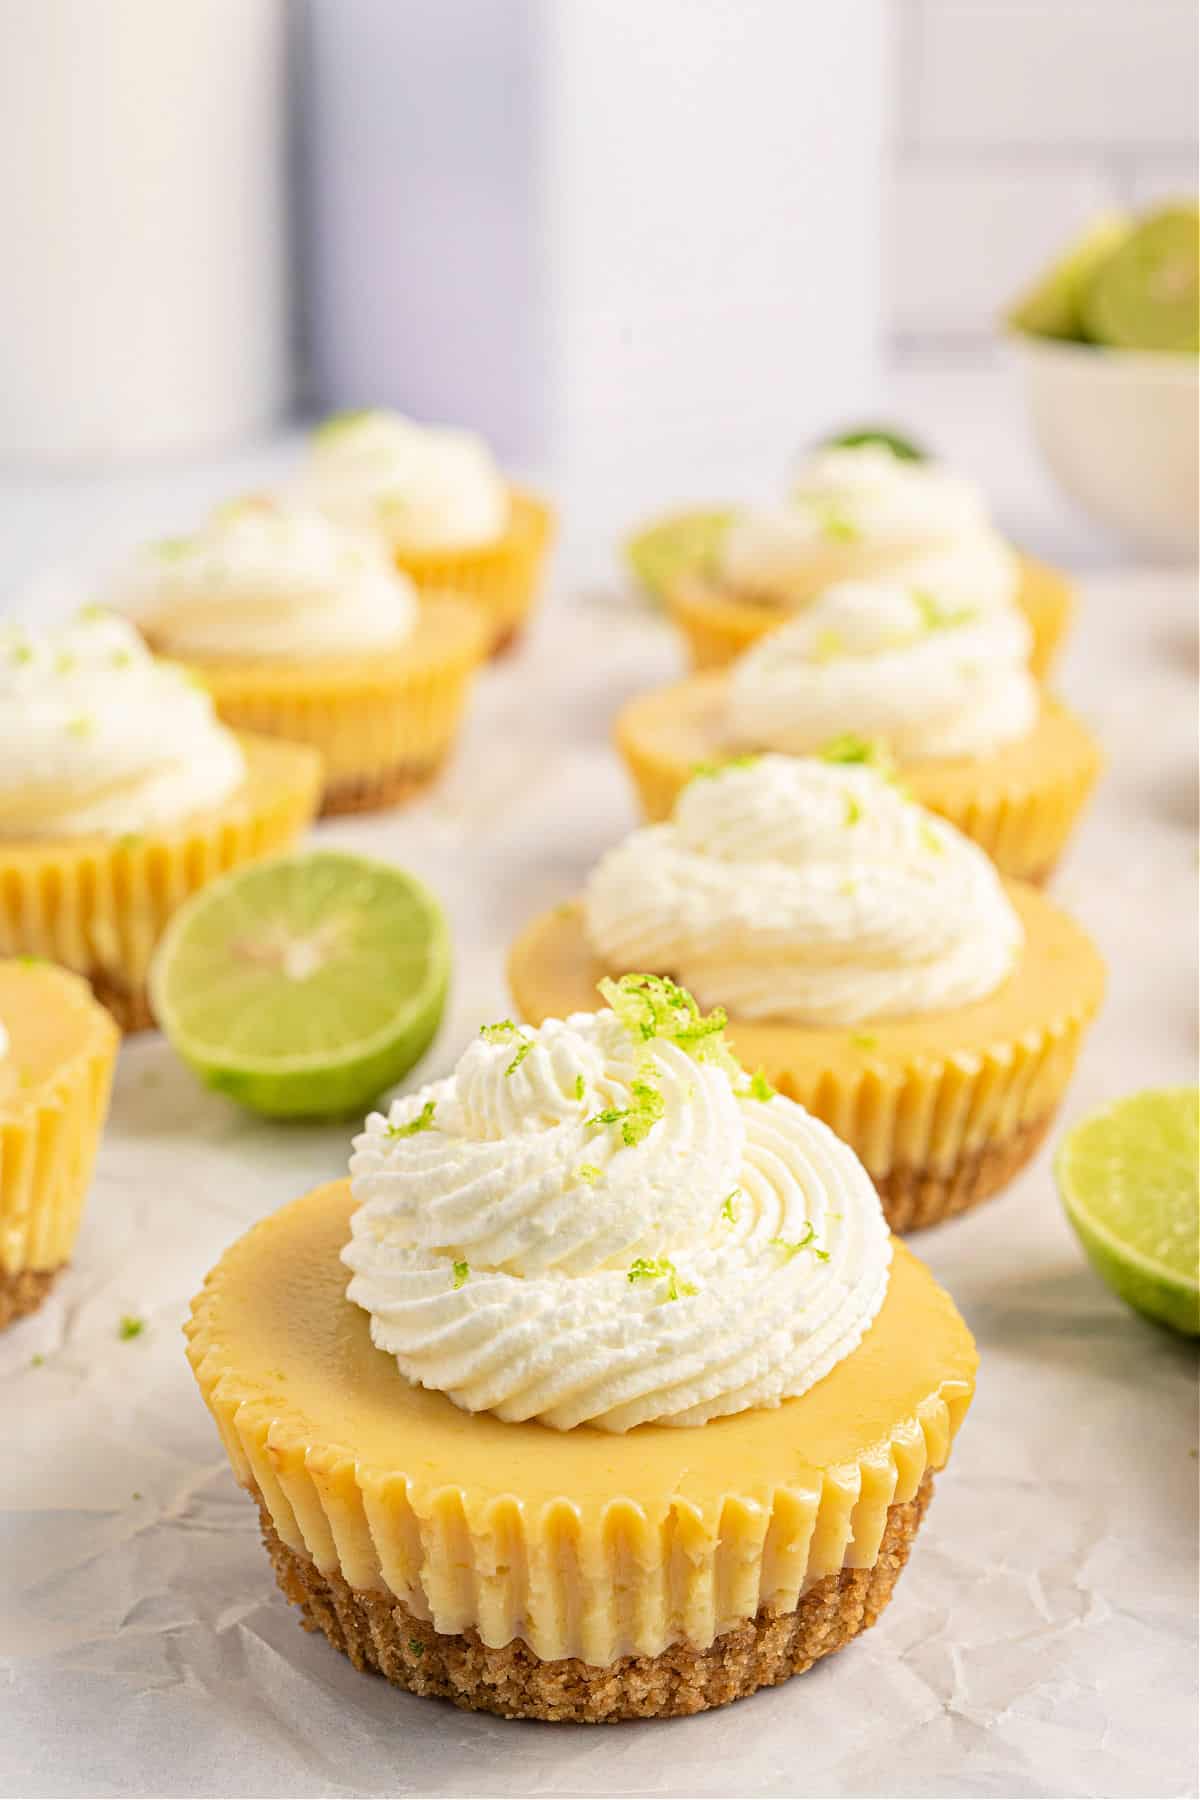 Individual key lime pies with whipped cream on top.